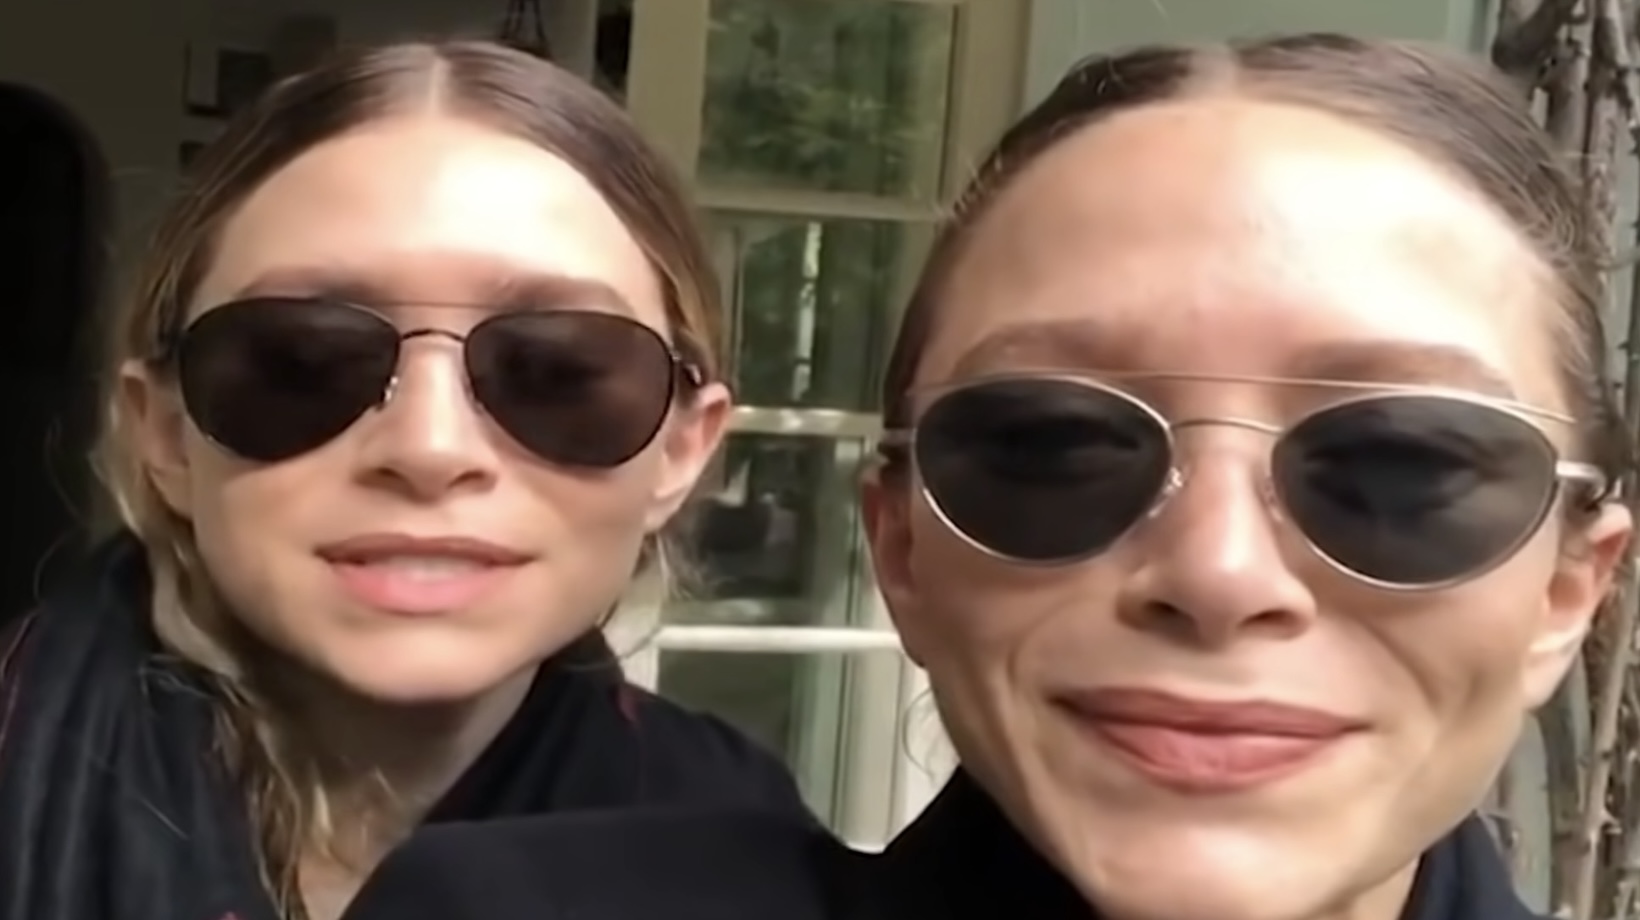 Latest News on the Famous Sisters: Where are the Olsen Sisters Now